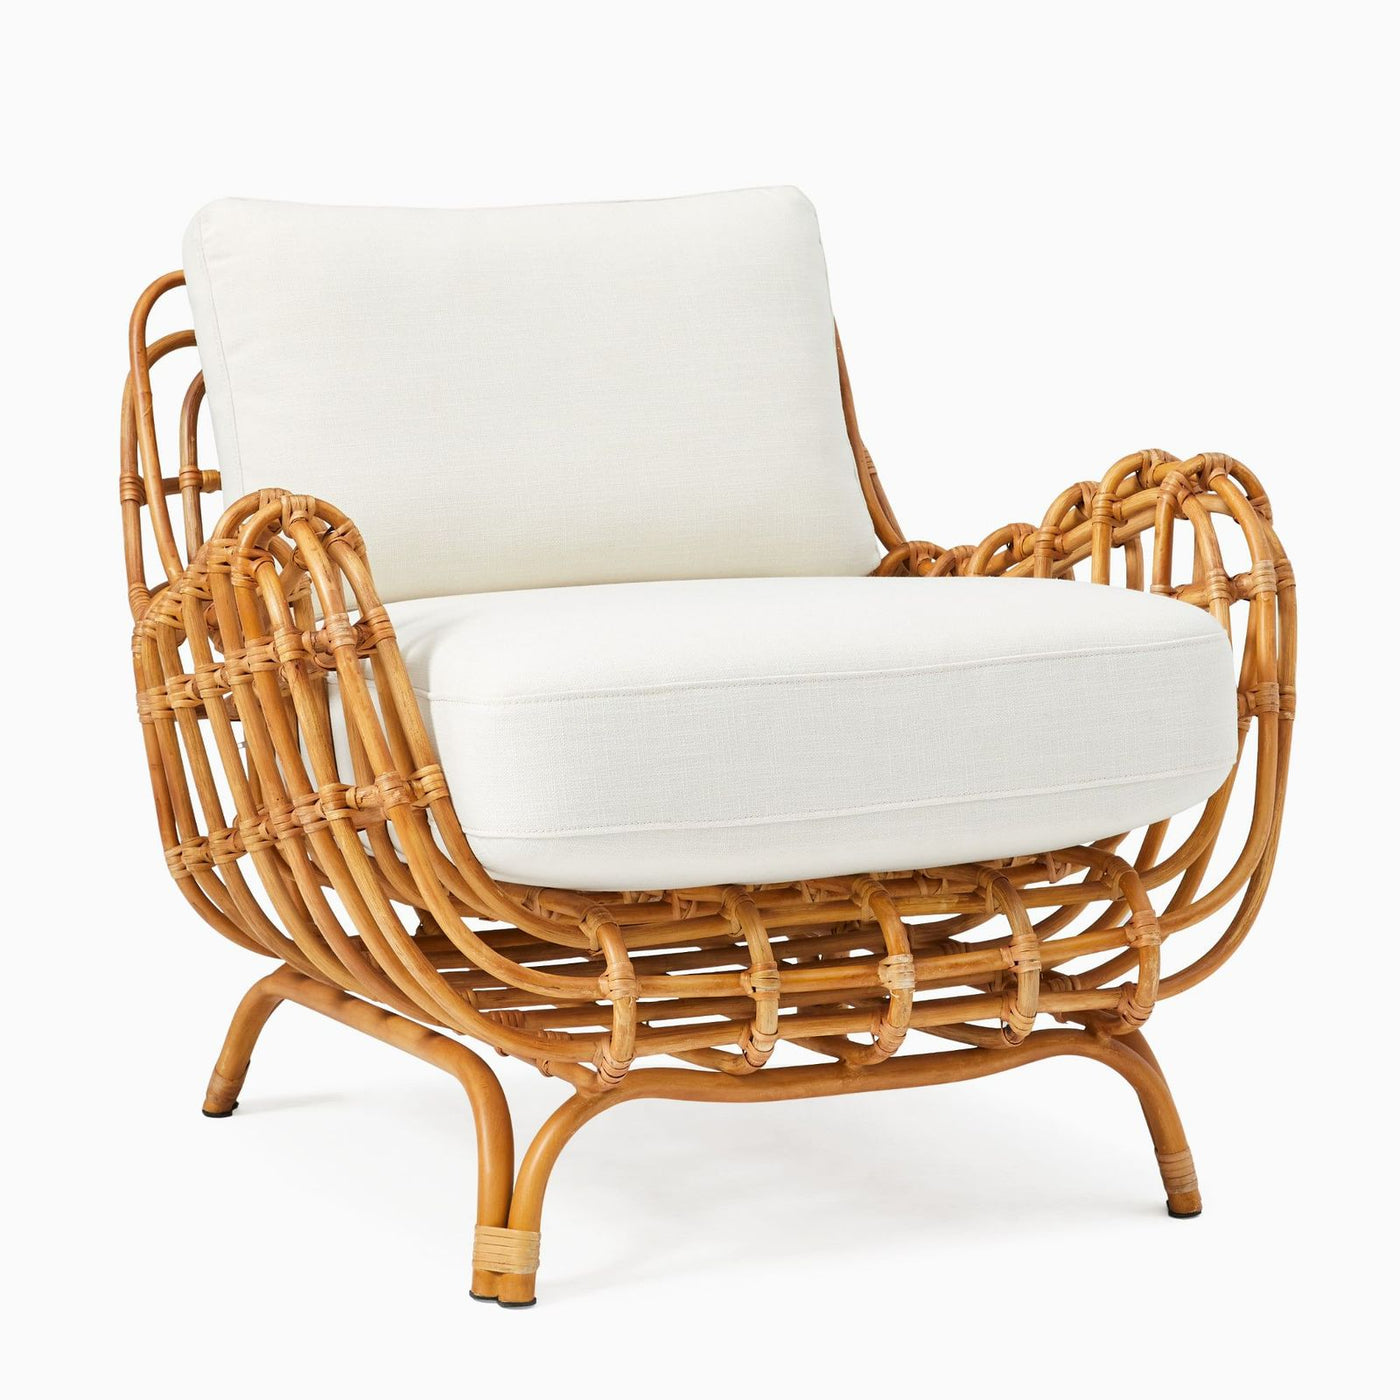 Havoul bamboo chair